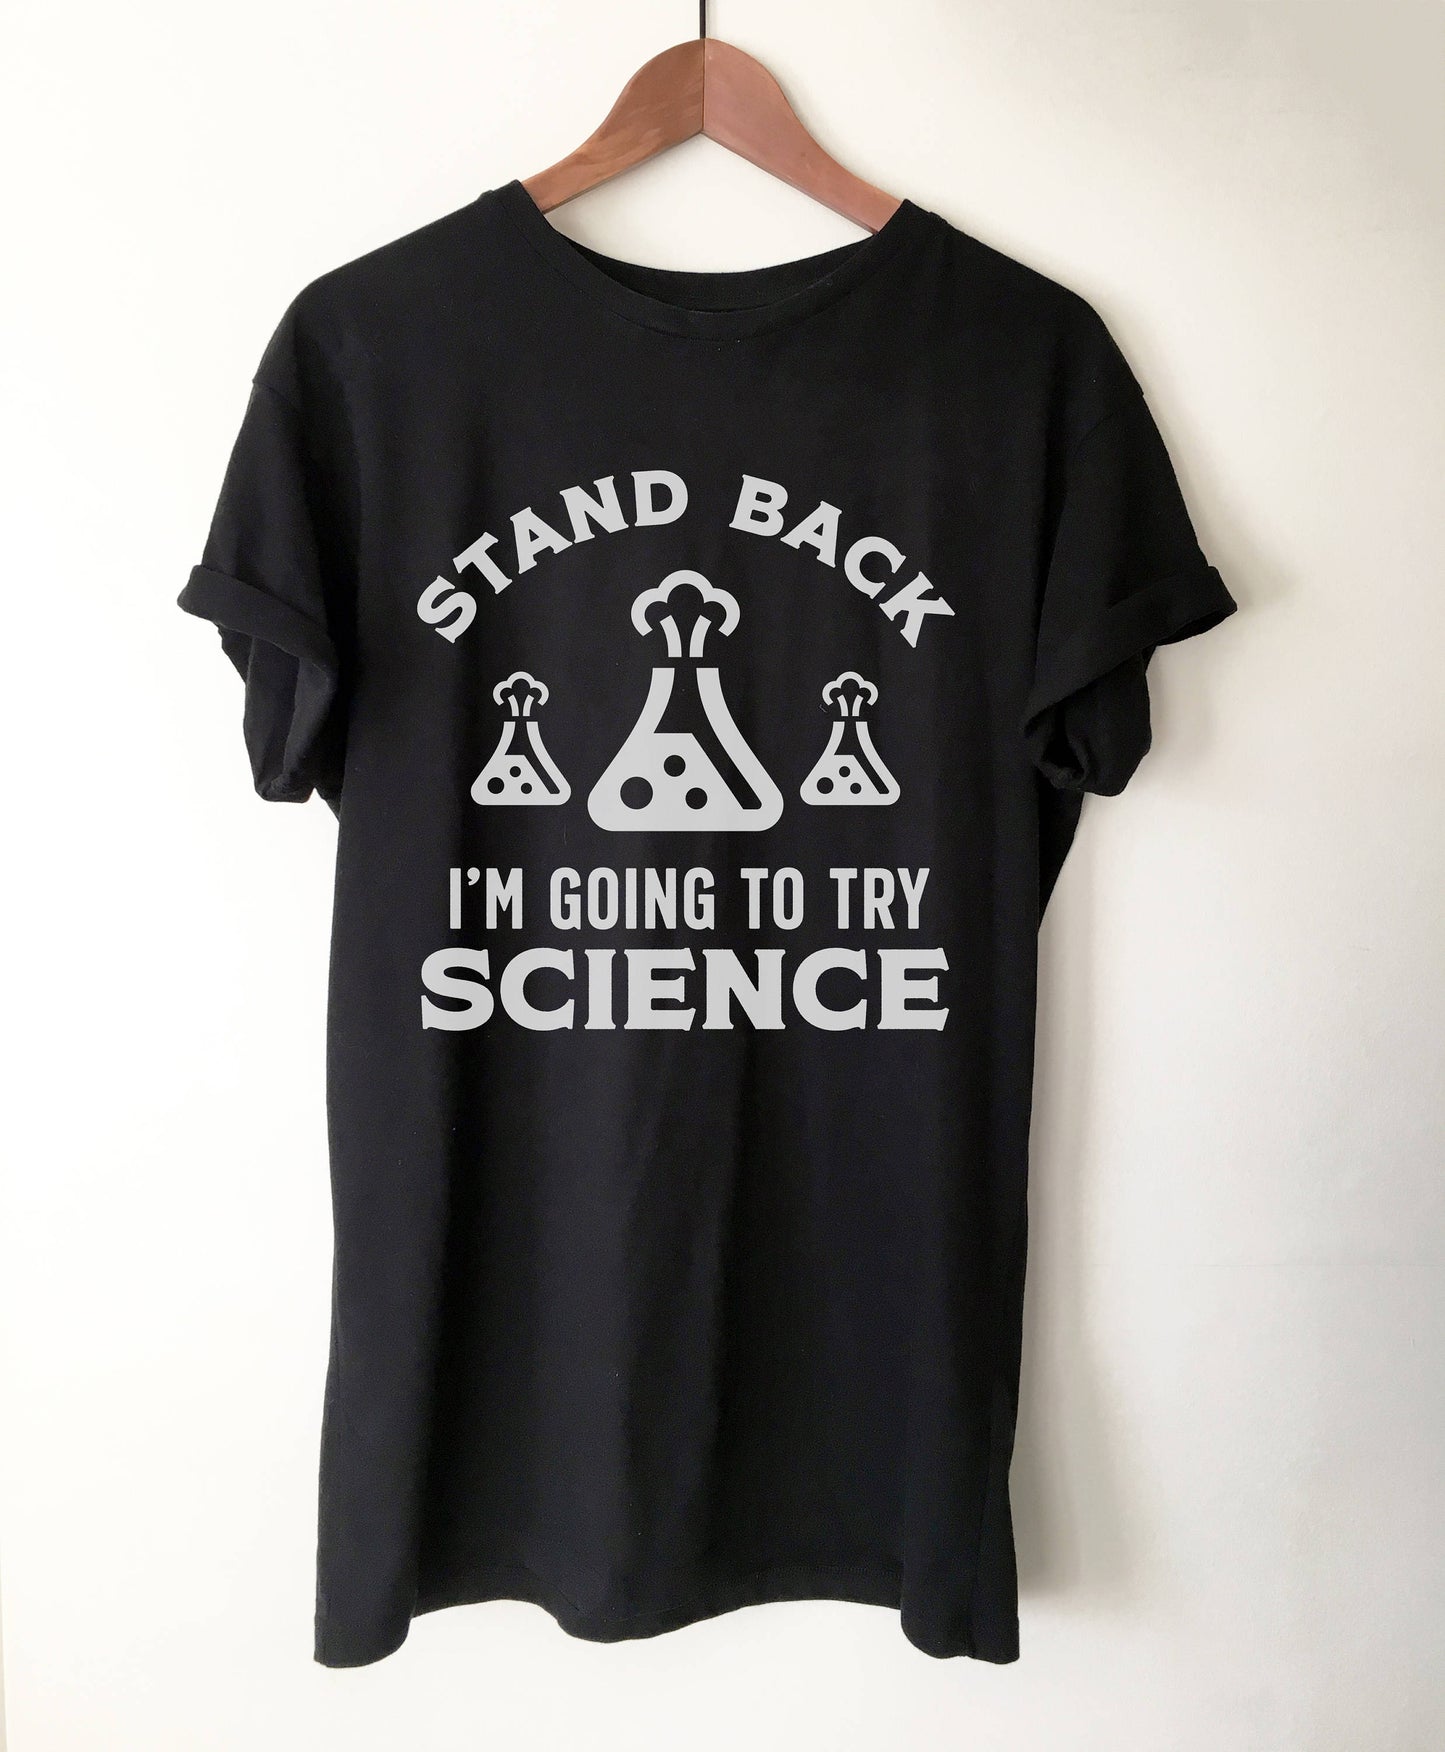 Stand Back I'm Going To Try Science Unisex Shirt - Chemistry shirt, Science shirt, Periodic table shirt, Chemistry gift, Chemistry teacher